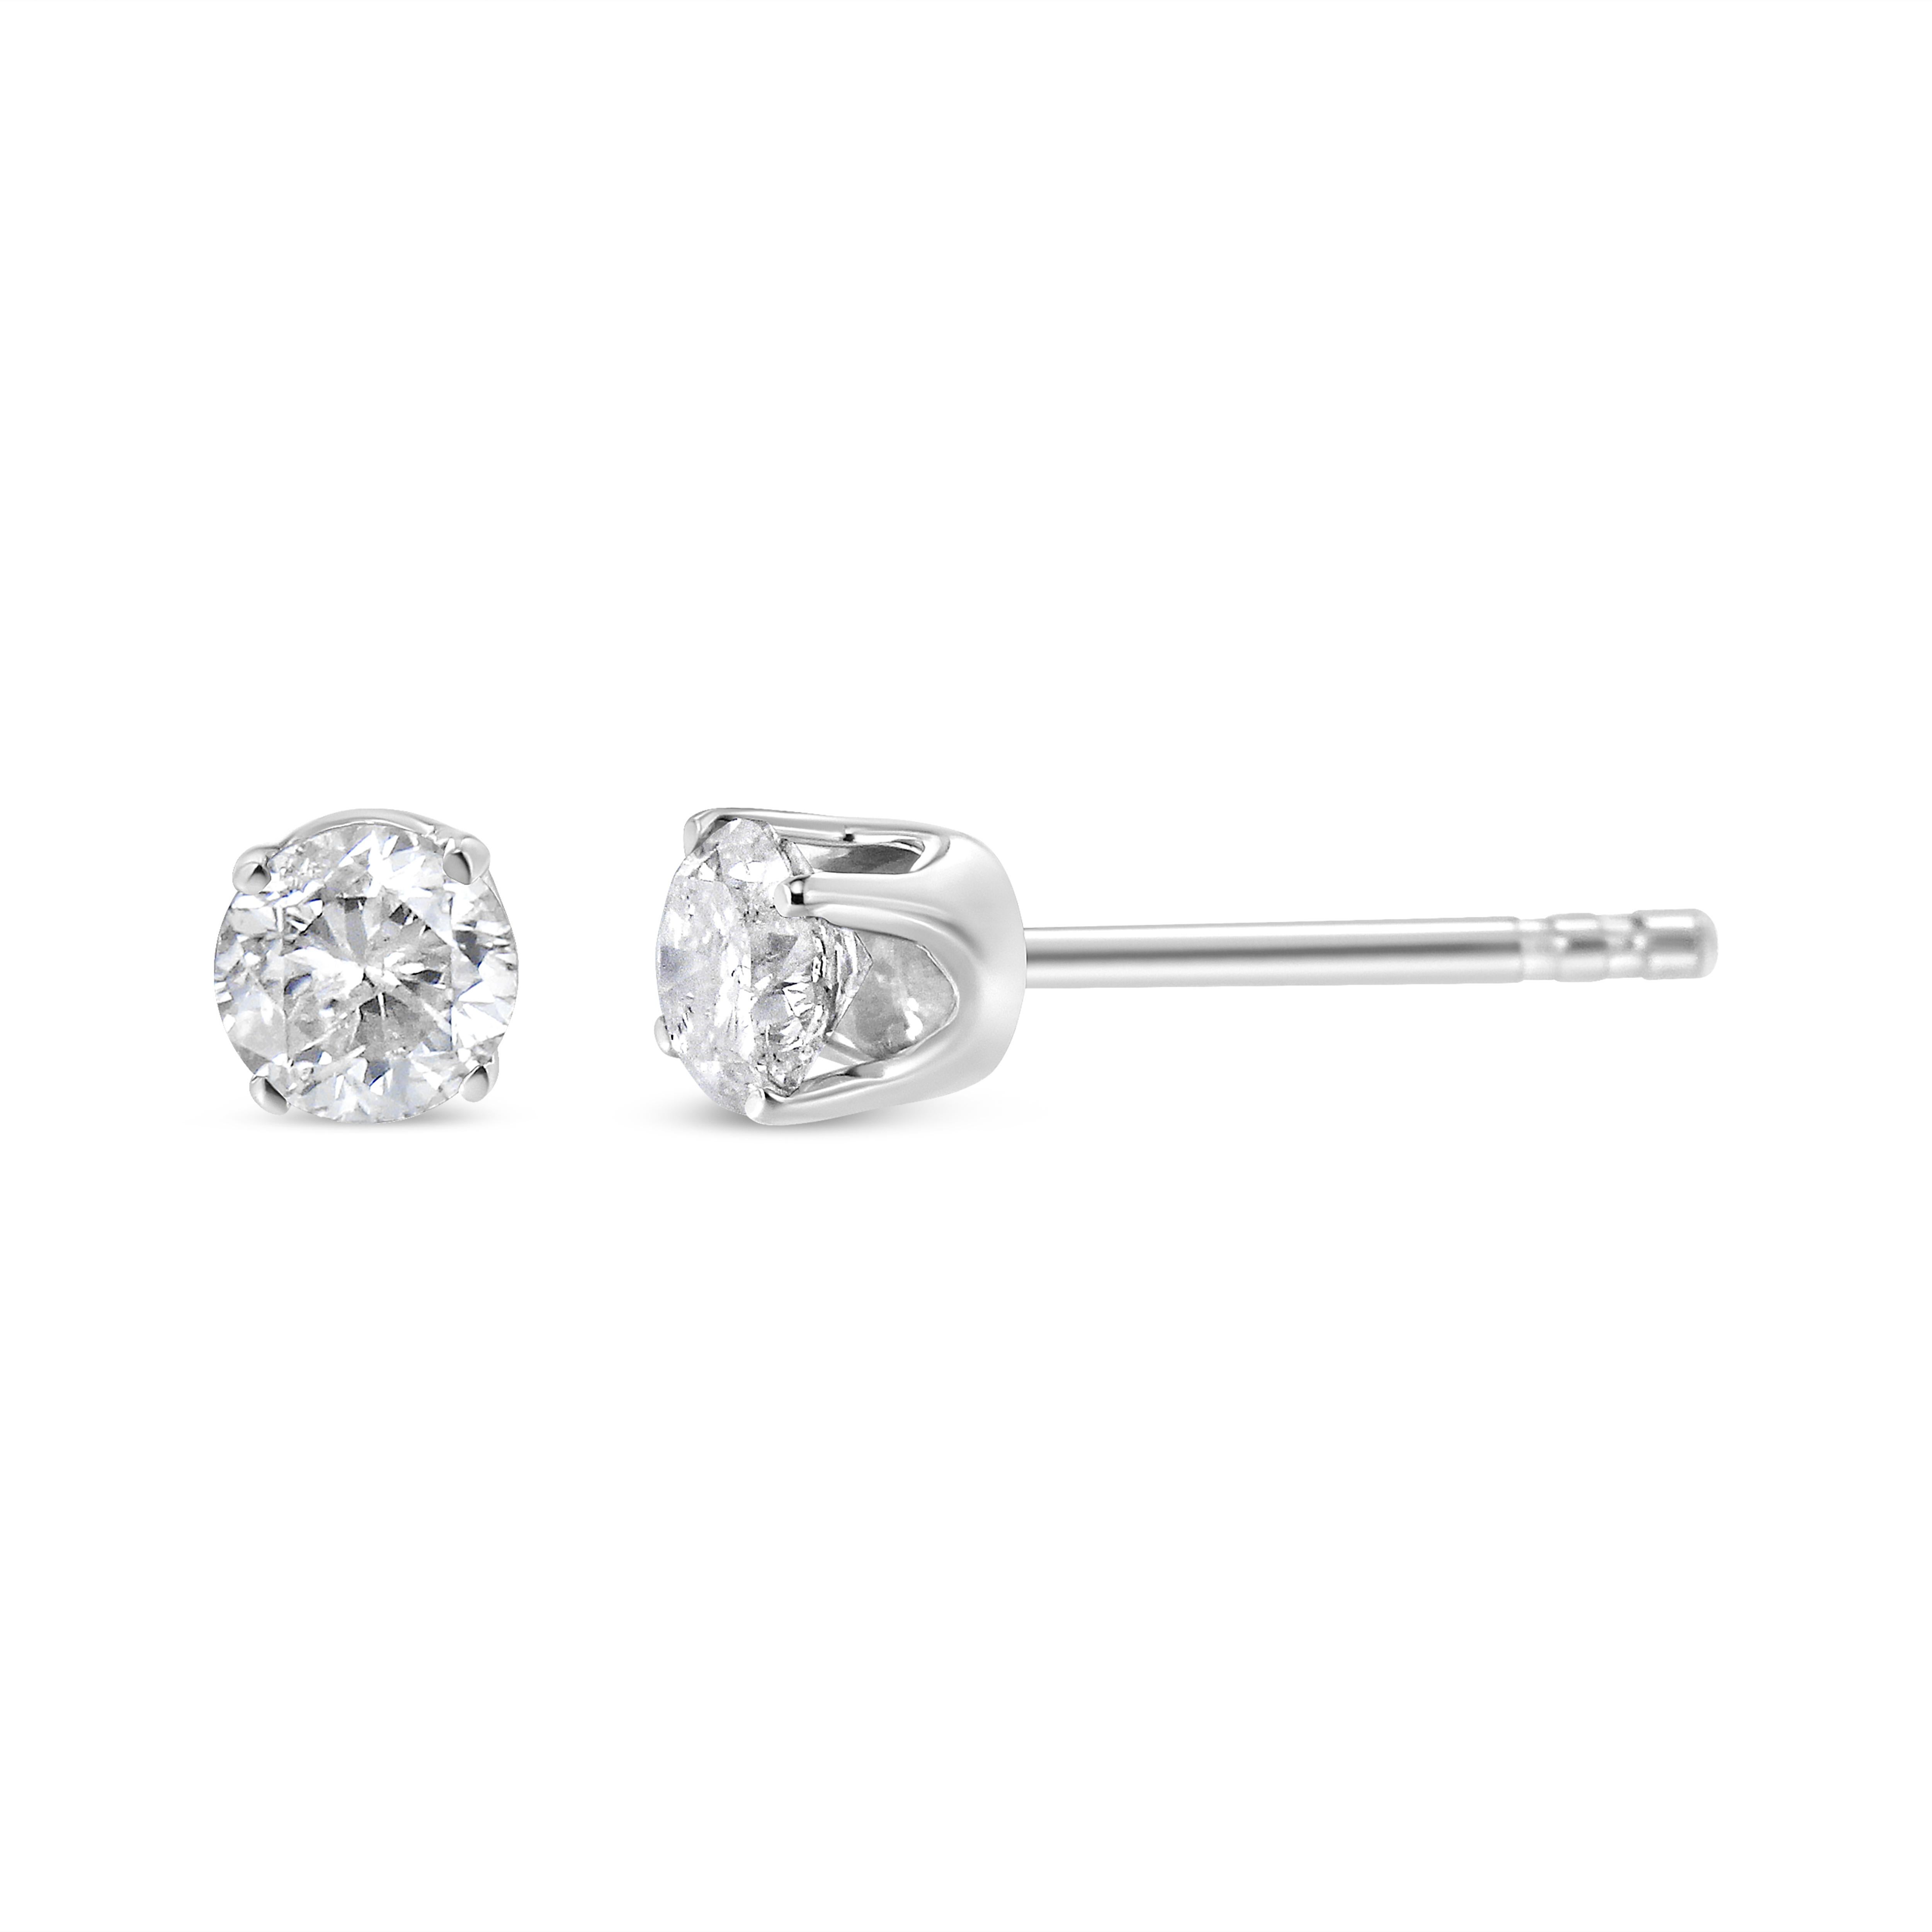 Contemporary AGS Certified 14K White Gold 1.0 Carat Round-Cut Solitaire Diamond Stud Earrings For Sale